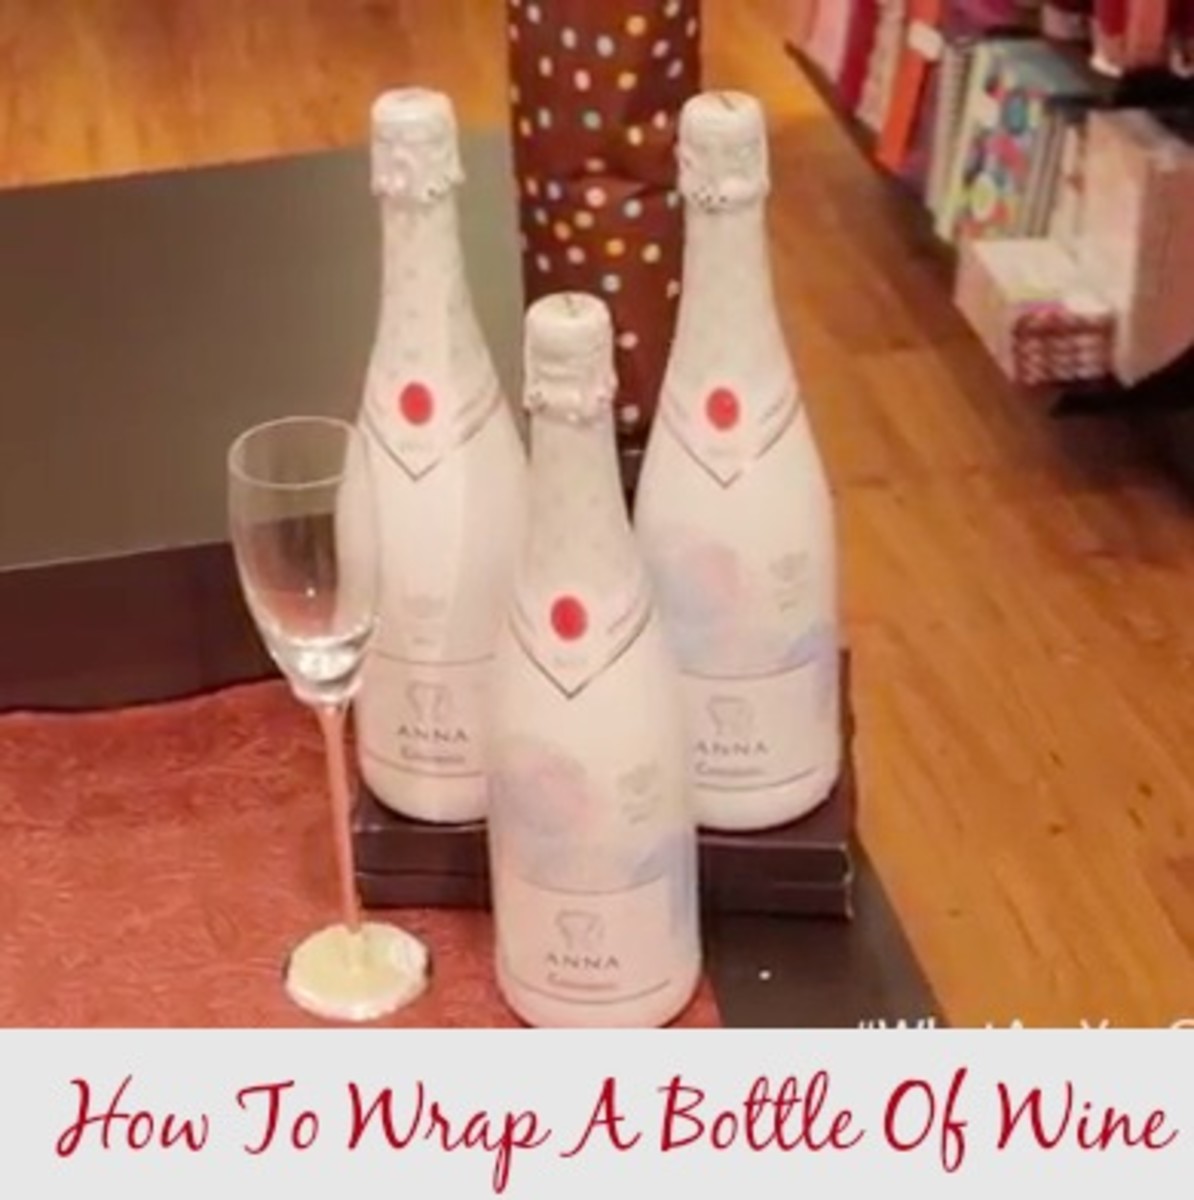 How To Wrap A Bottle Of Wine